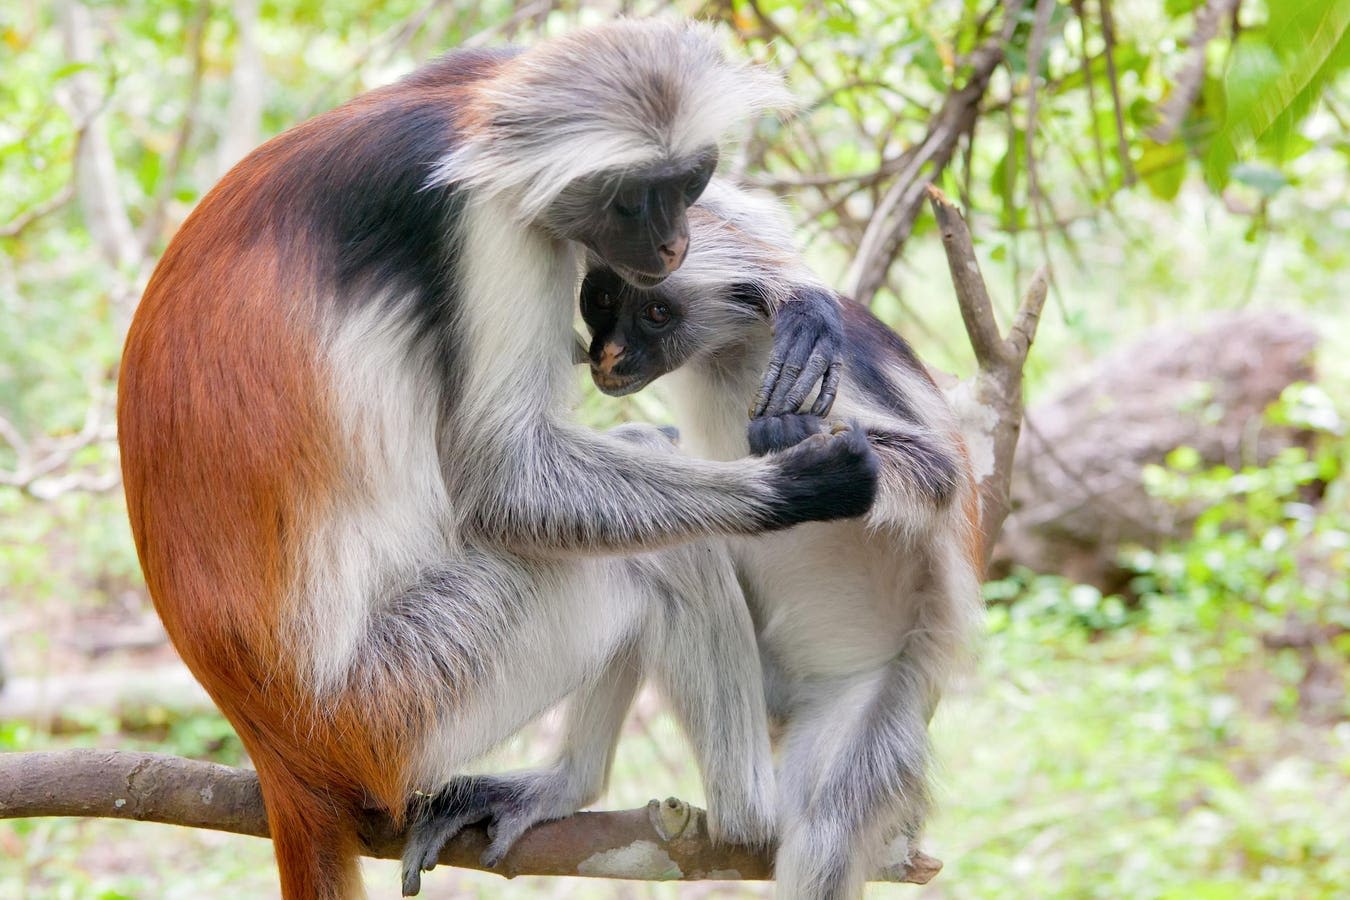 How Can Saving This Fluffy Monkey Help Africa’s Forests?